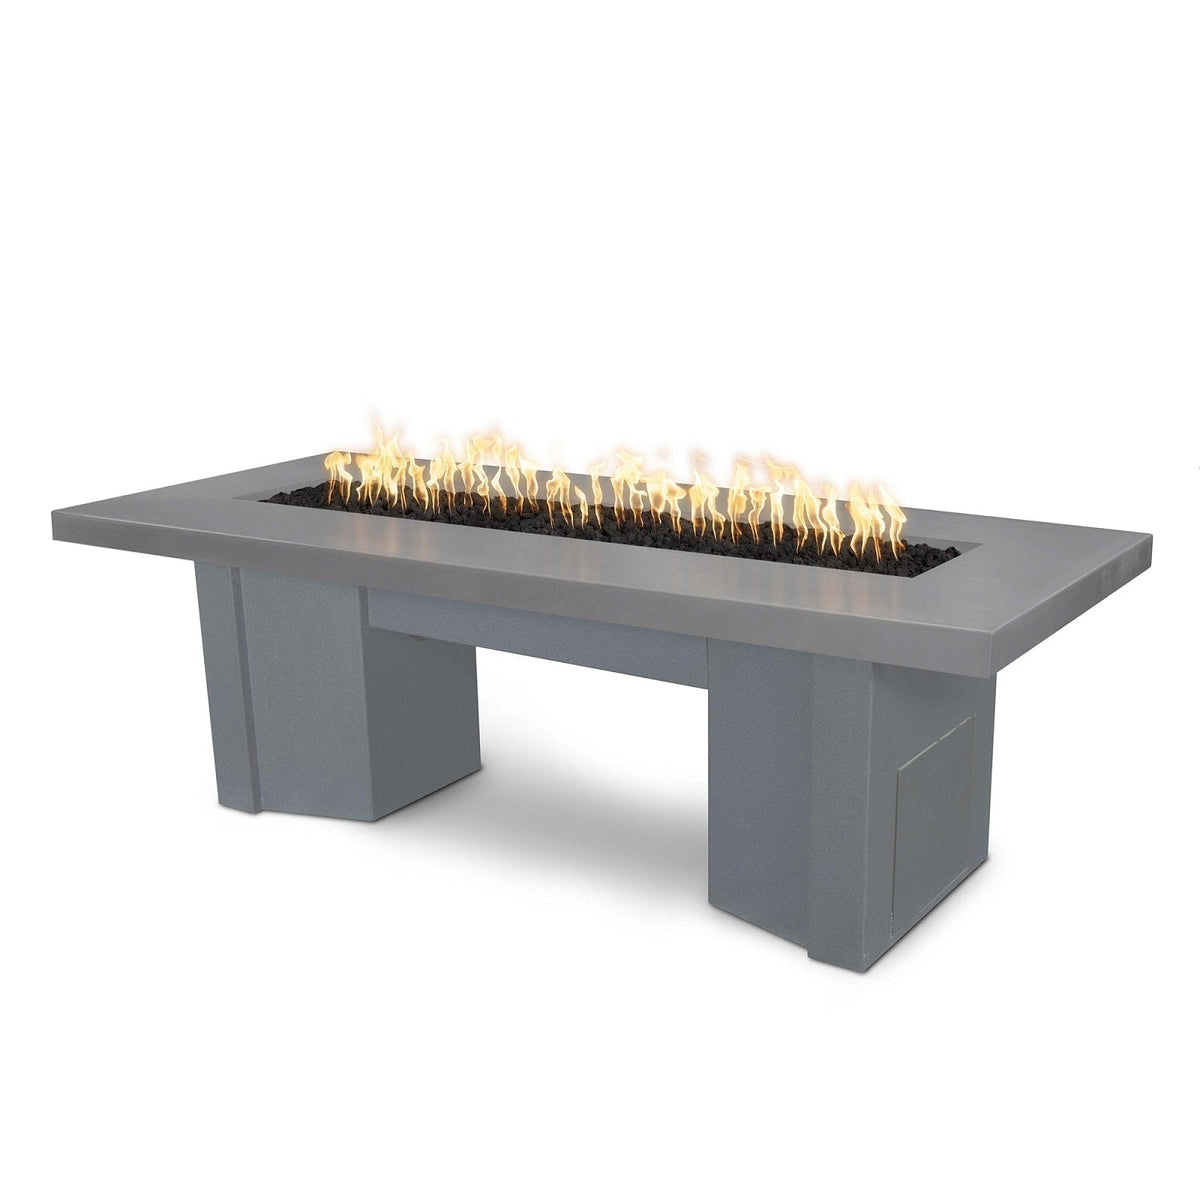 The Outdoor Plus Fire Features Natural Gray (-NGY) / Gray Powder Coated Steel (-GRY) The Outdoor Plus 78&quot; Alameda Fire Table Smooth Concrete in Liquid Propane - 110V Plug &amp; Play Electronic Ignition / OPT-ALMGFRC78EKIT-LP